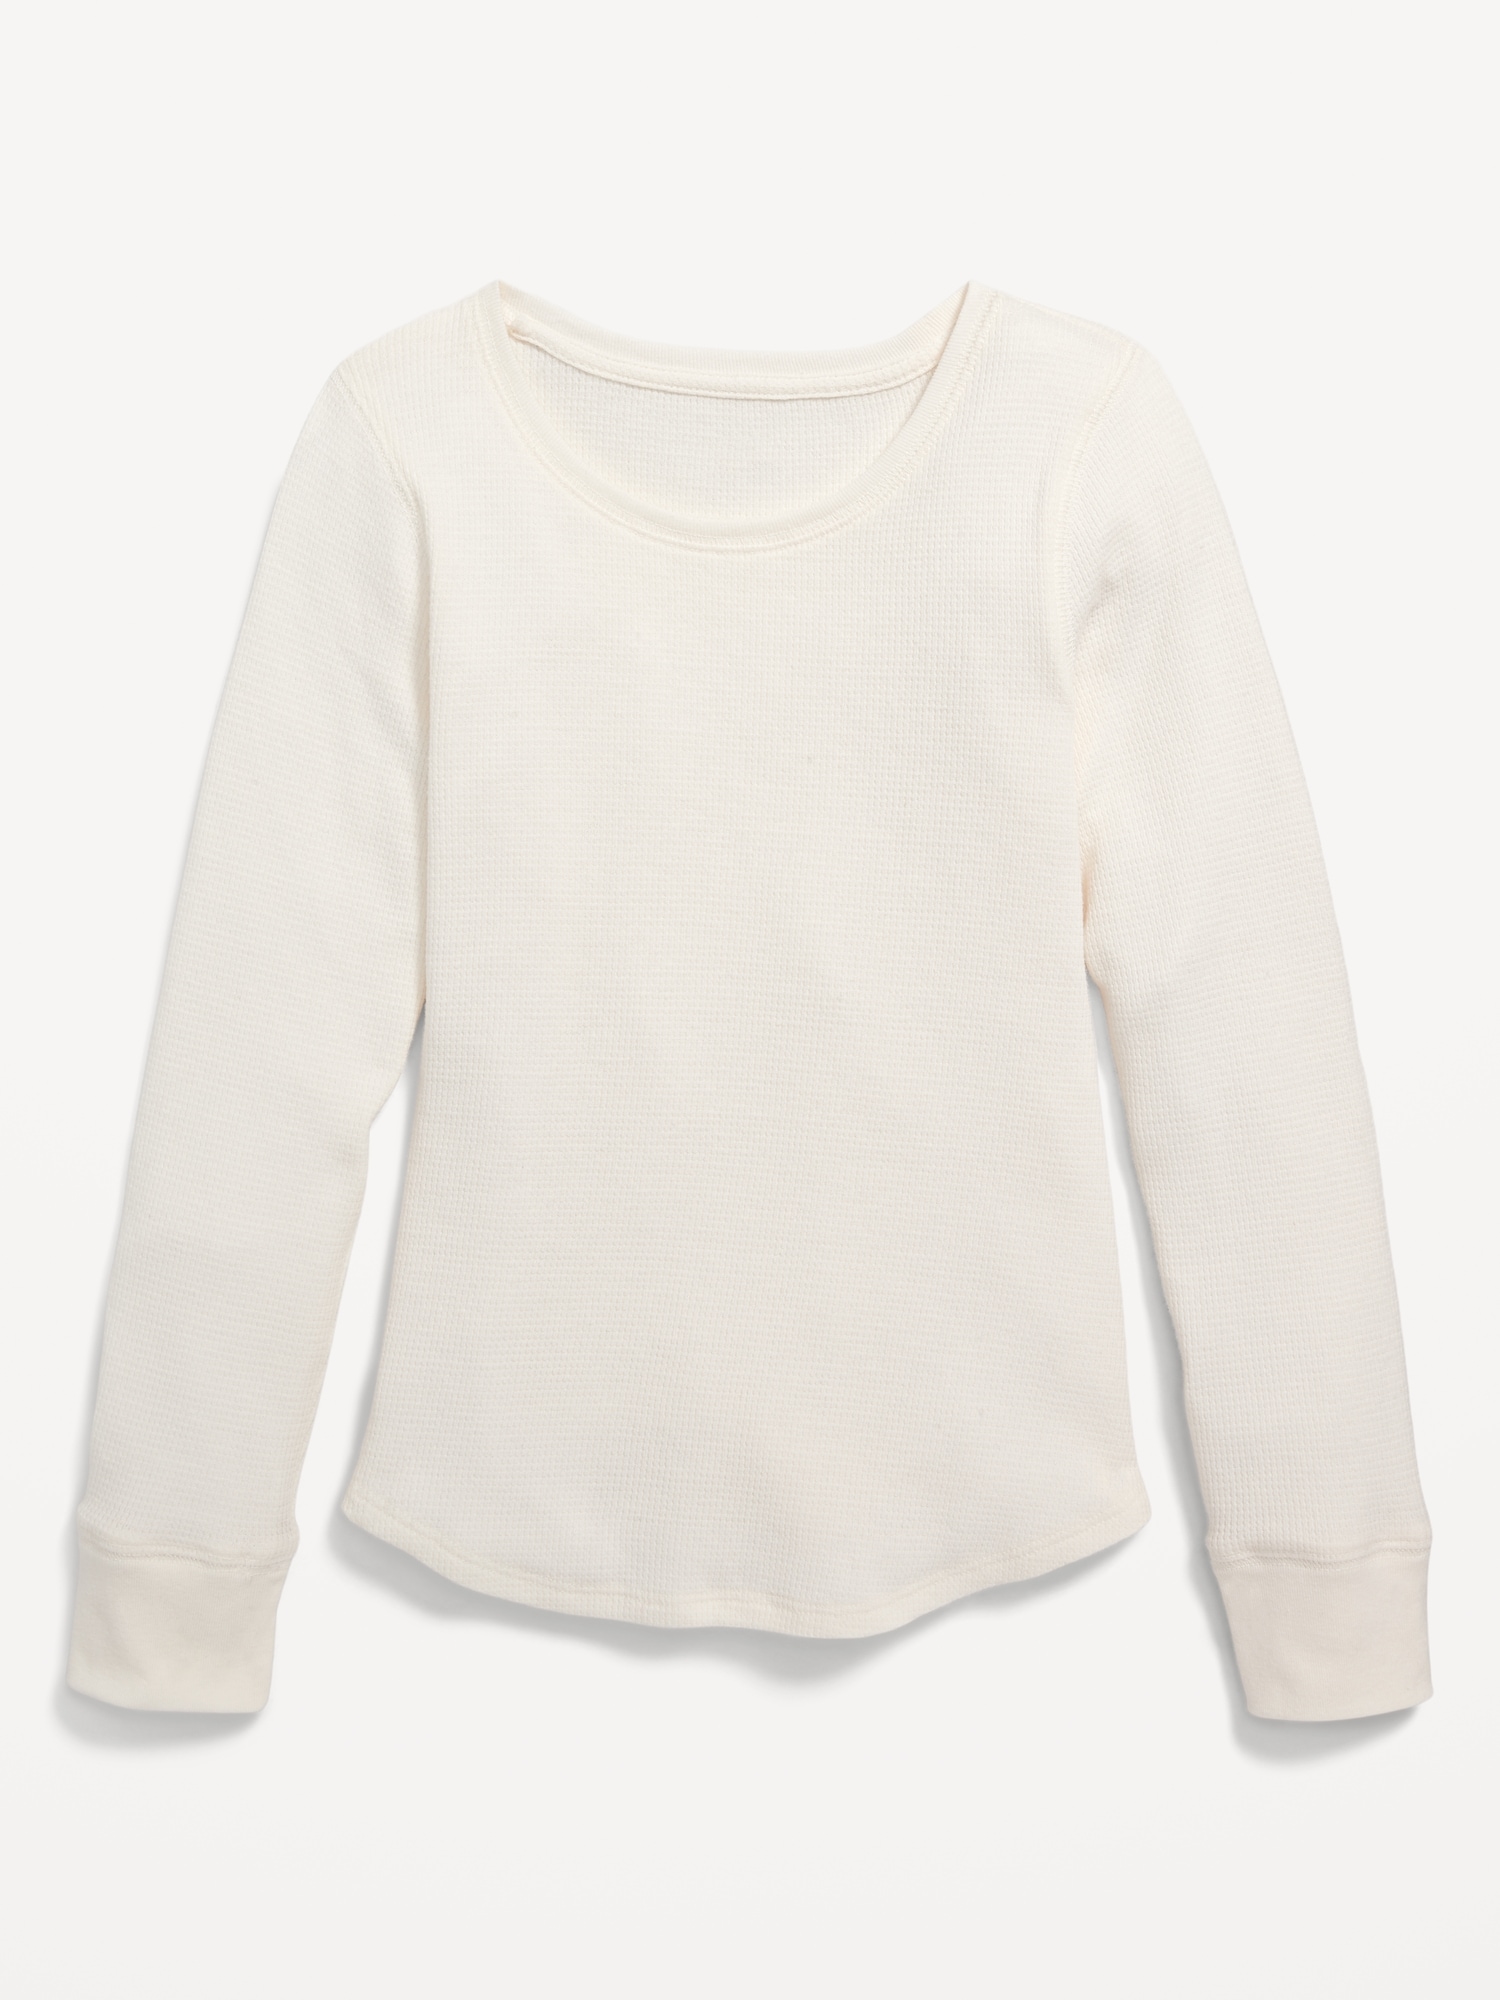 Long-Sleeve Solid Thermal-Knit T-Shirt for Girls | Old Navy